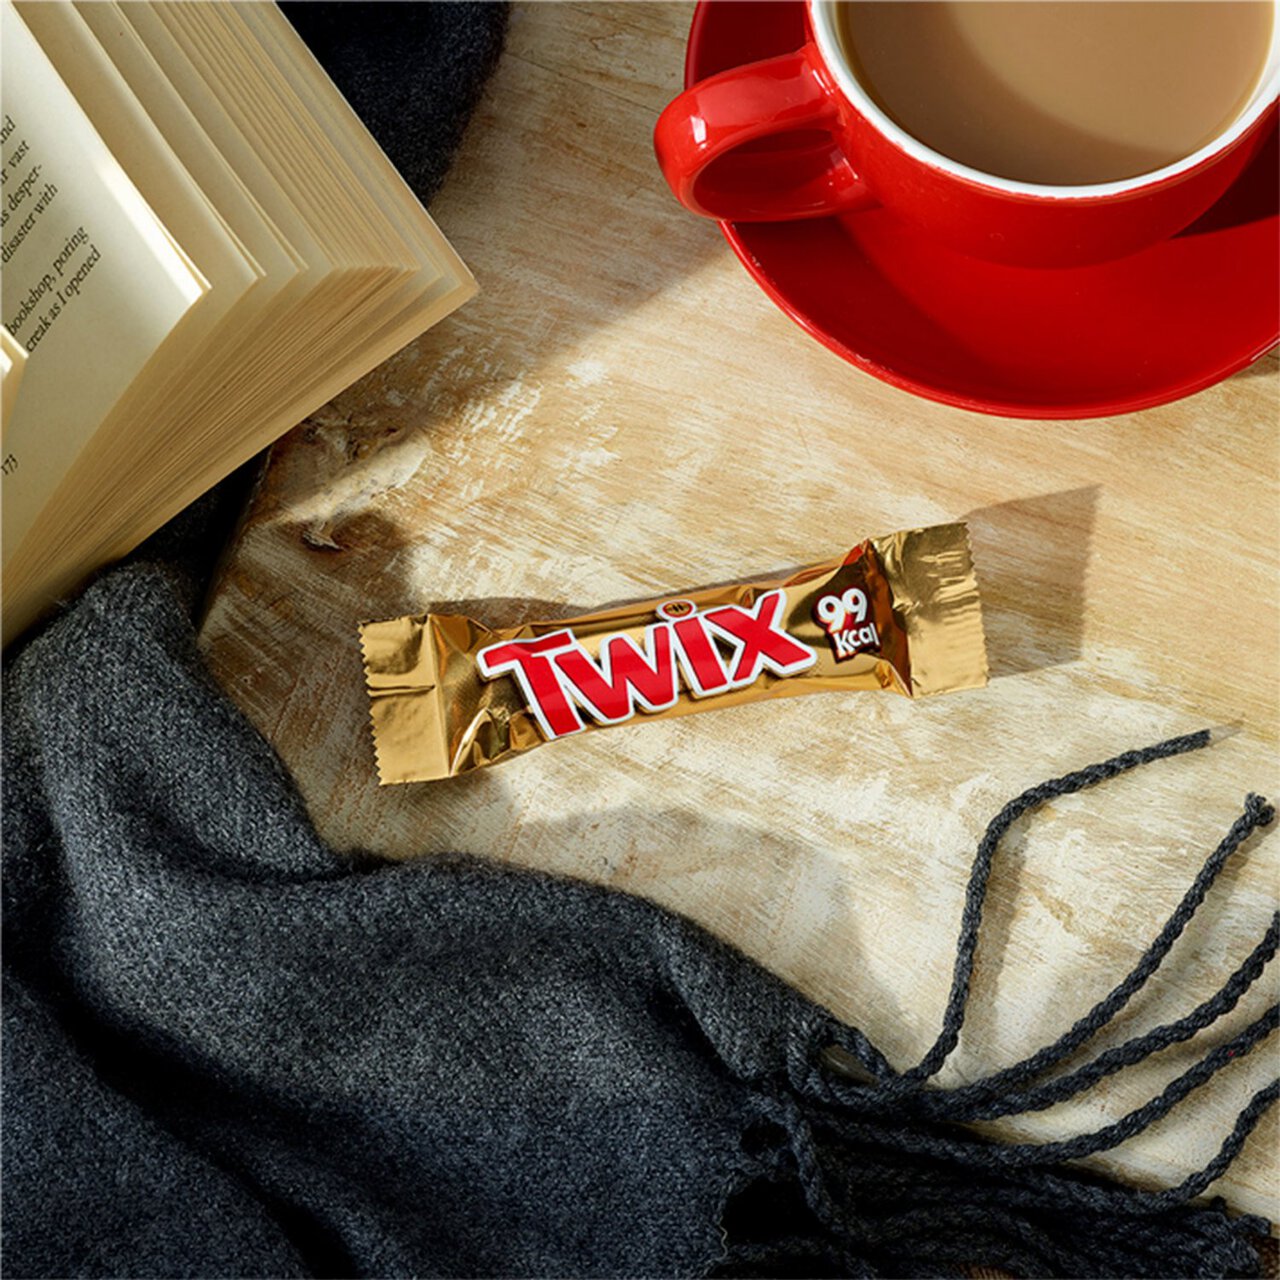 Twix 99Kcal Caramel, Biscuit & Milk Chocolate Fingers Snack Bars Multipack 10 x 20g